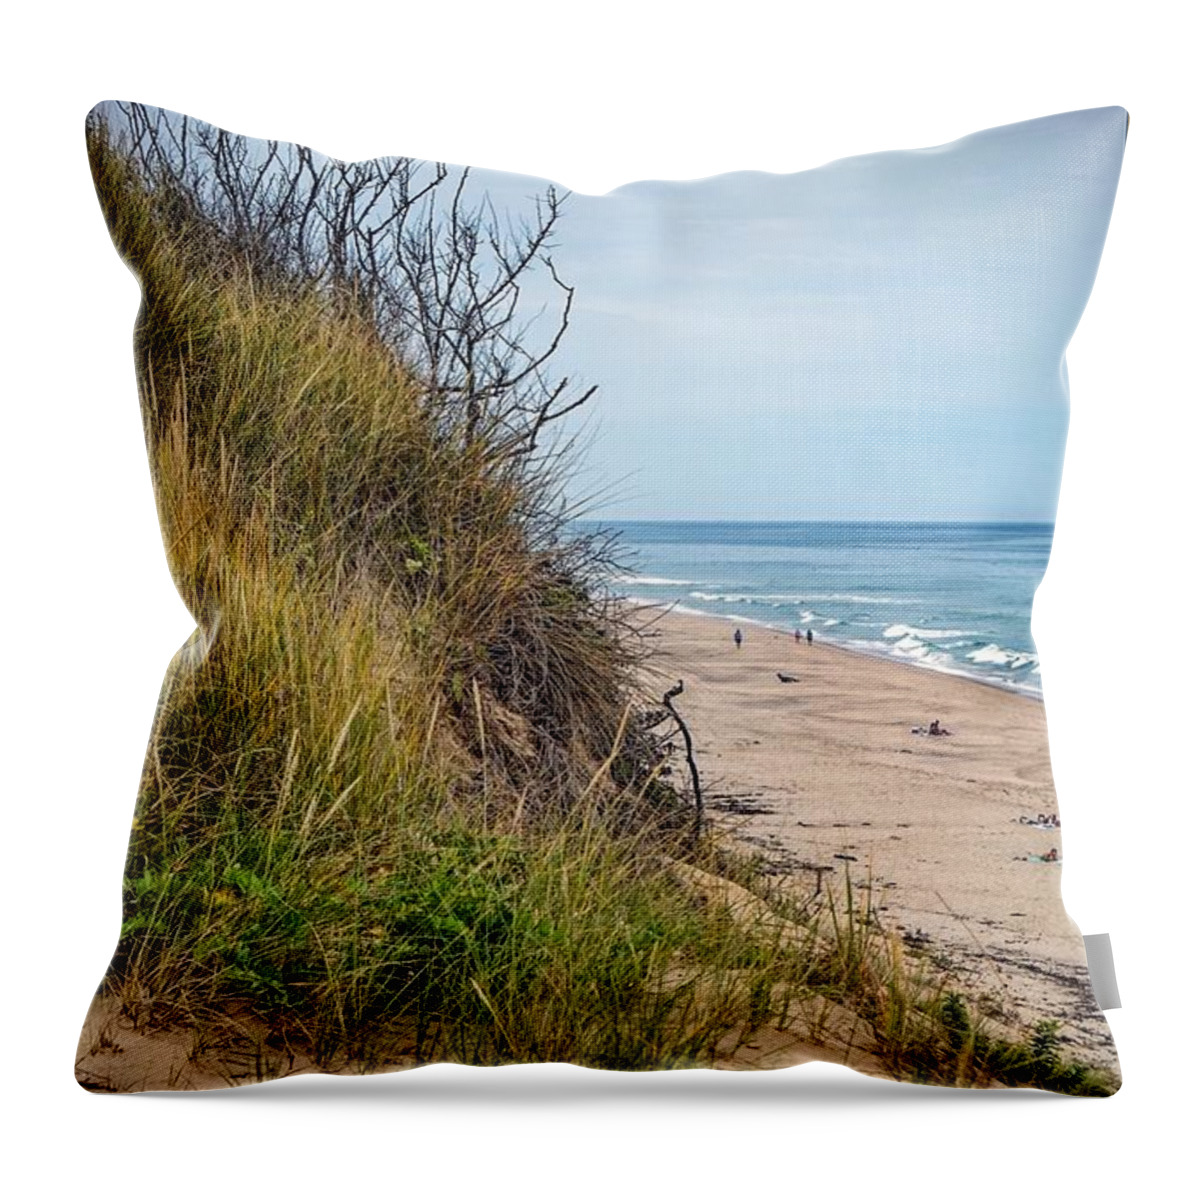  Throw Pillow featuring the photograph Dune by Kendall McKernon